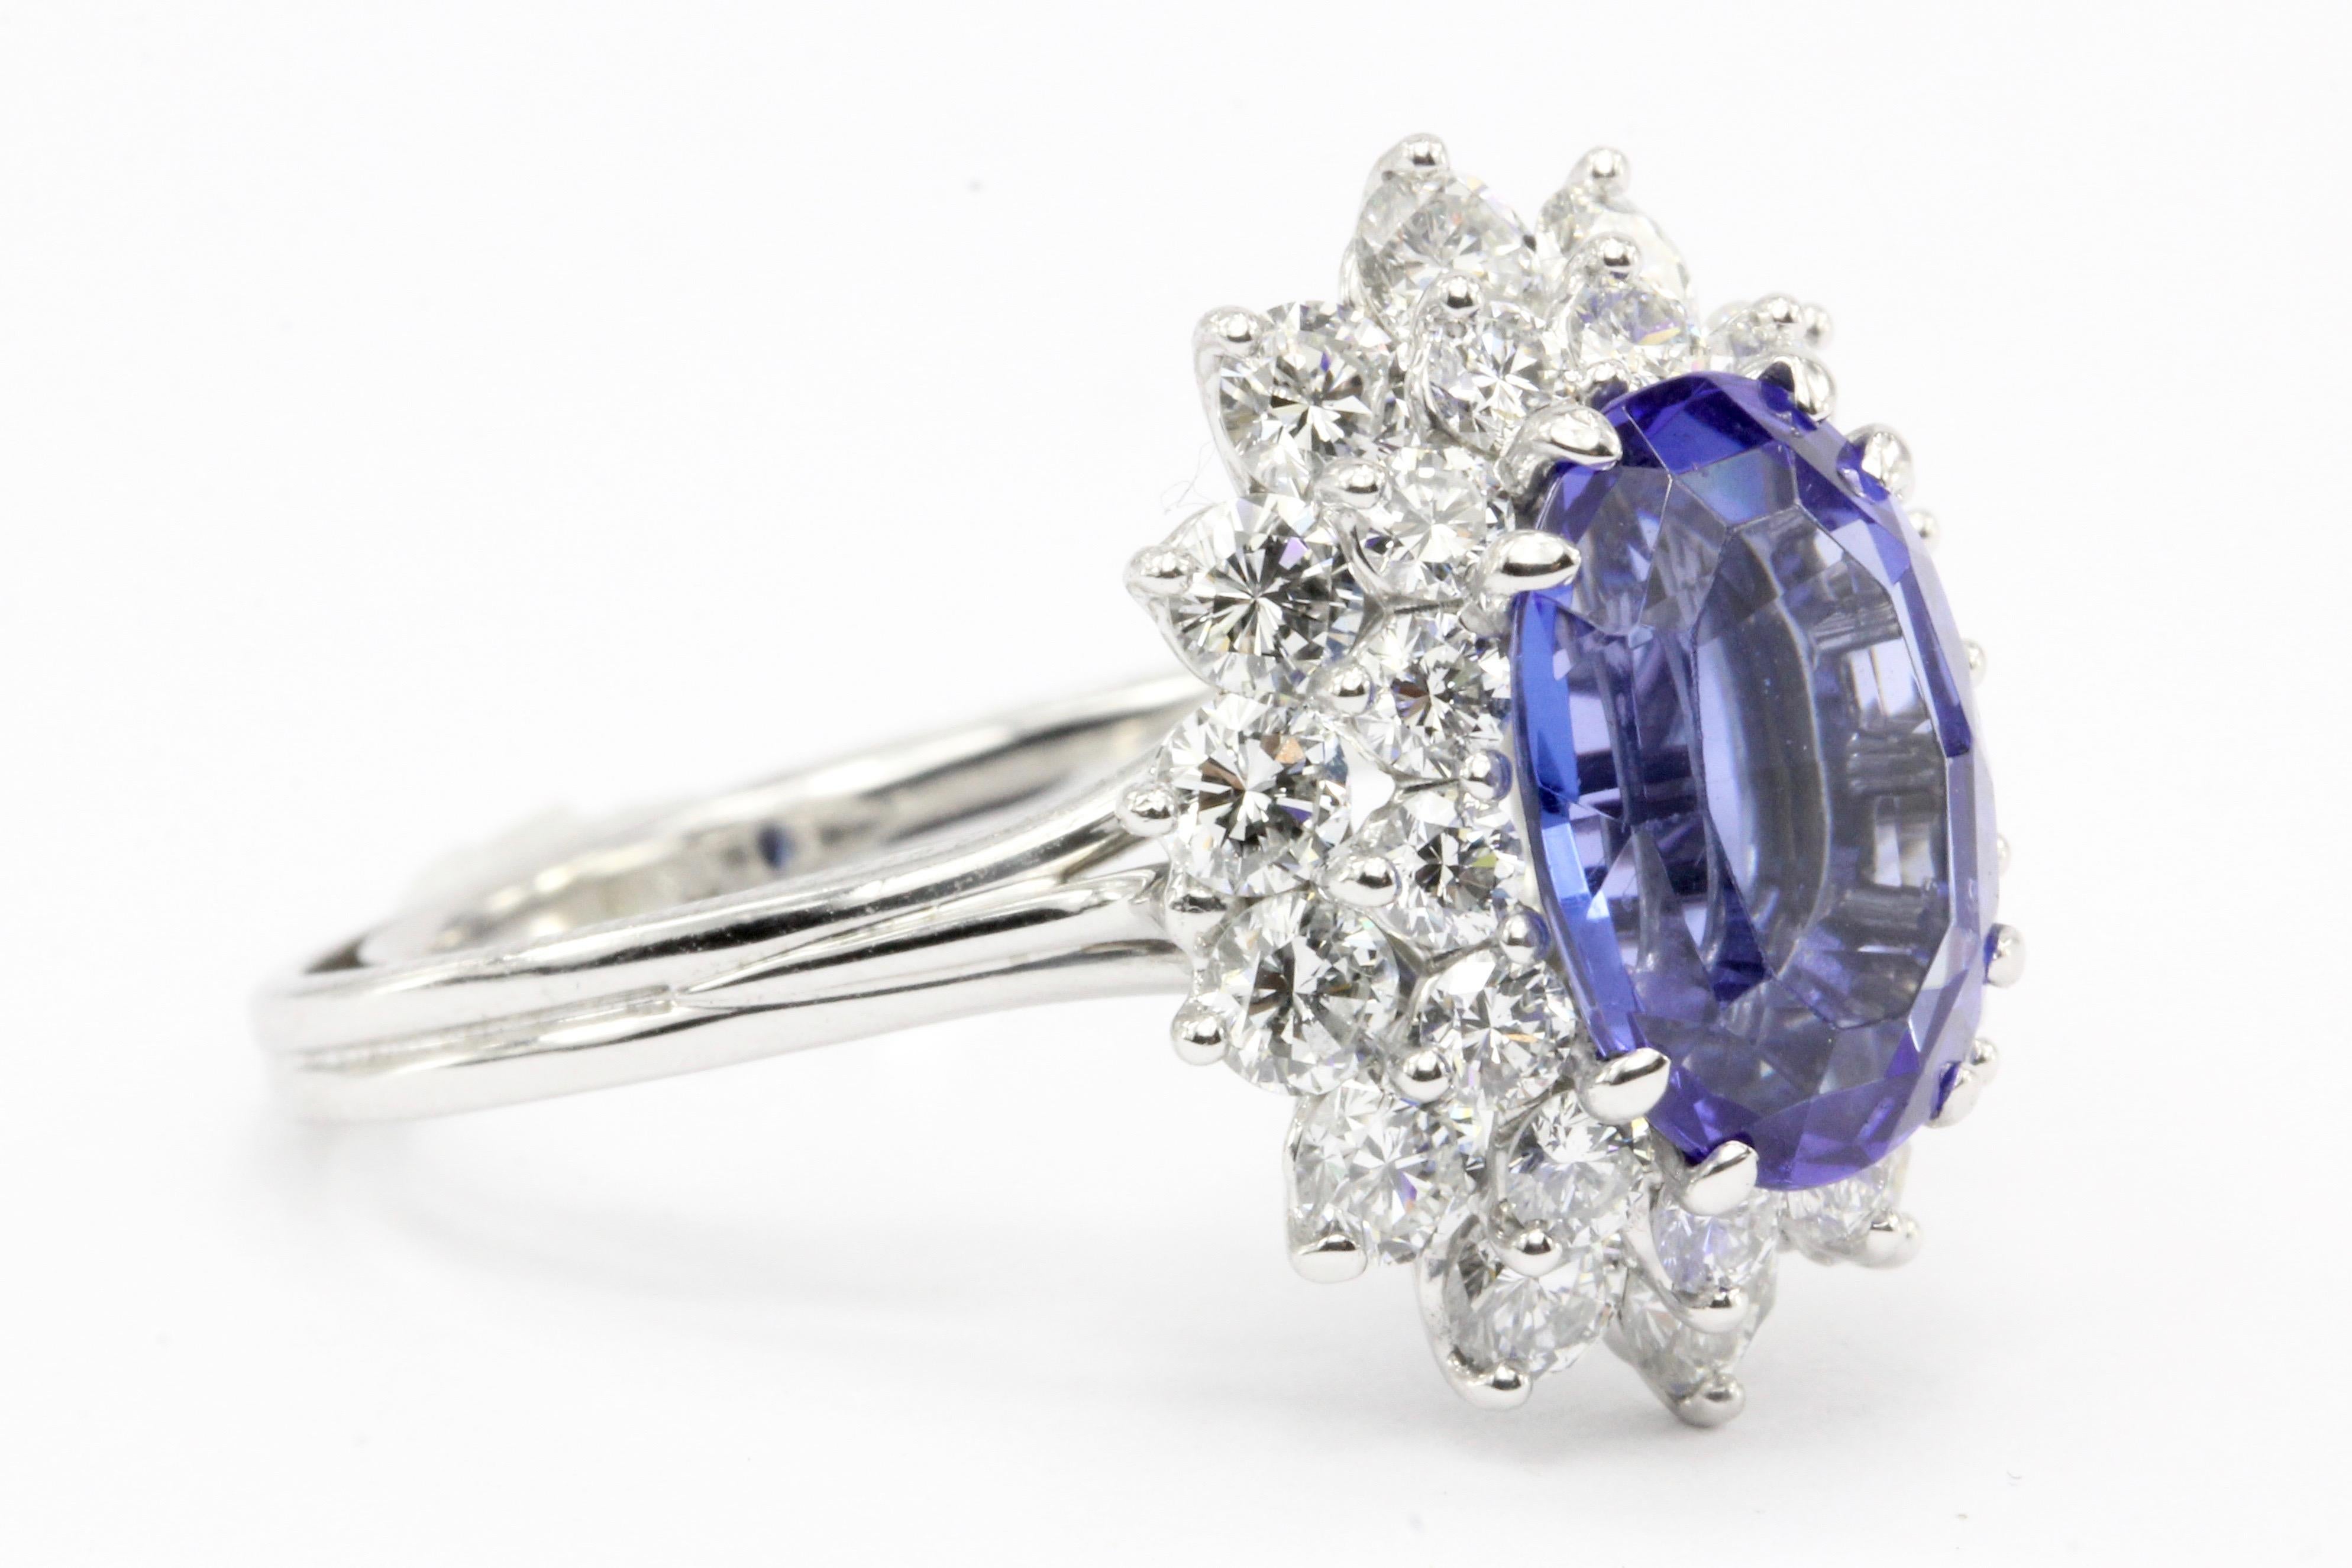 Era: Modern

Hallmarks: T&Co

Composition: Platinum

Primary Stone: Tanzanite

Stone Carat: 3.96 Carats

Hue: Violetish Blue

Tone: Medium Light

Saturation: Strong

Dimensions: 11.97 x 8.12 x 5.12mm

Shape: Oval Faceted

Accent Stone: 28 Round